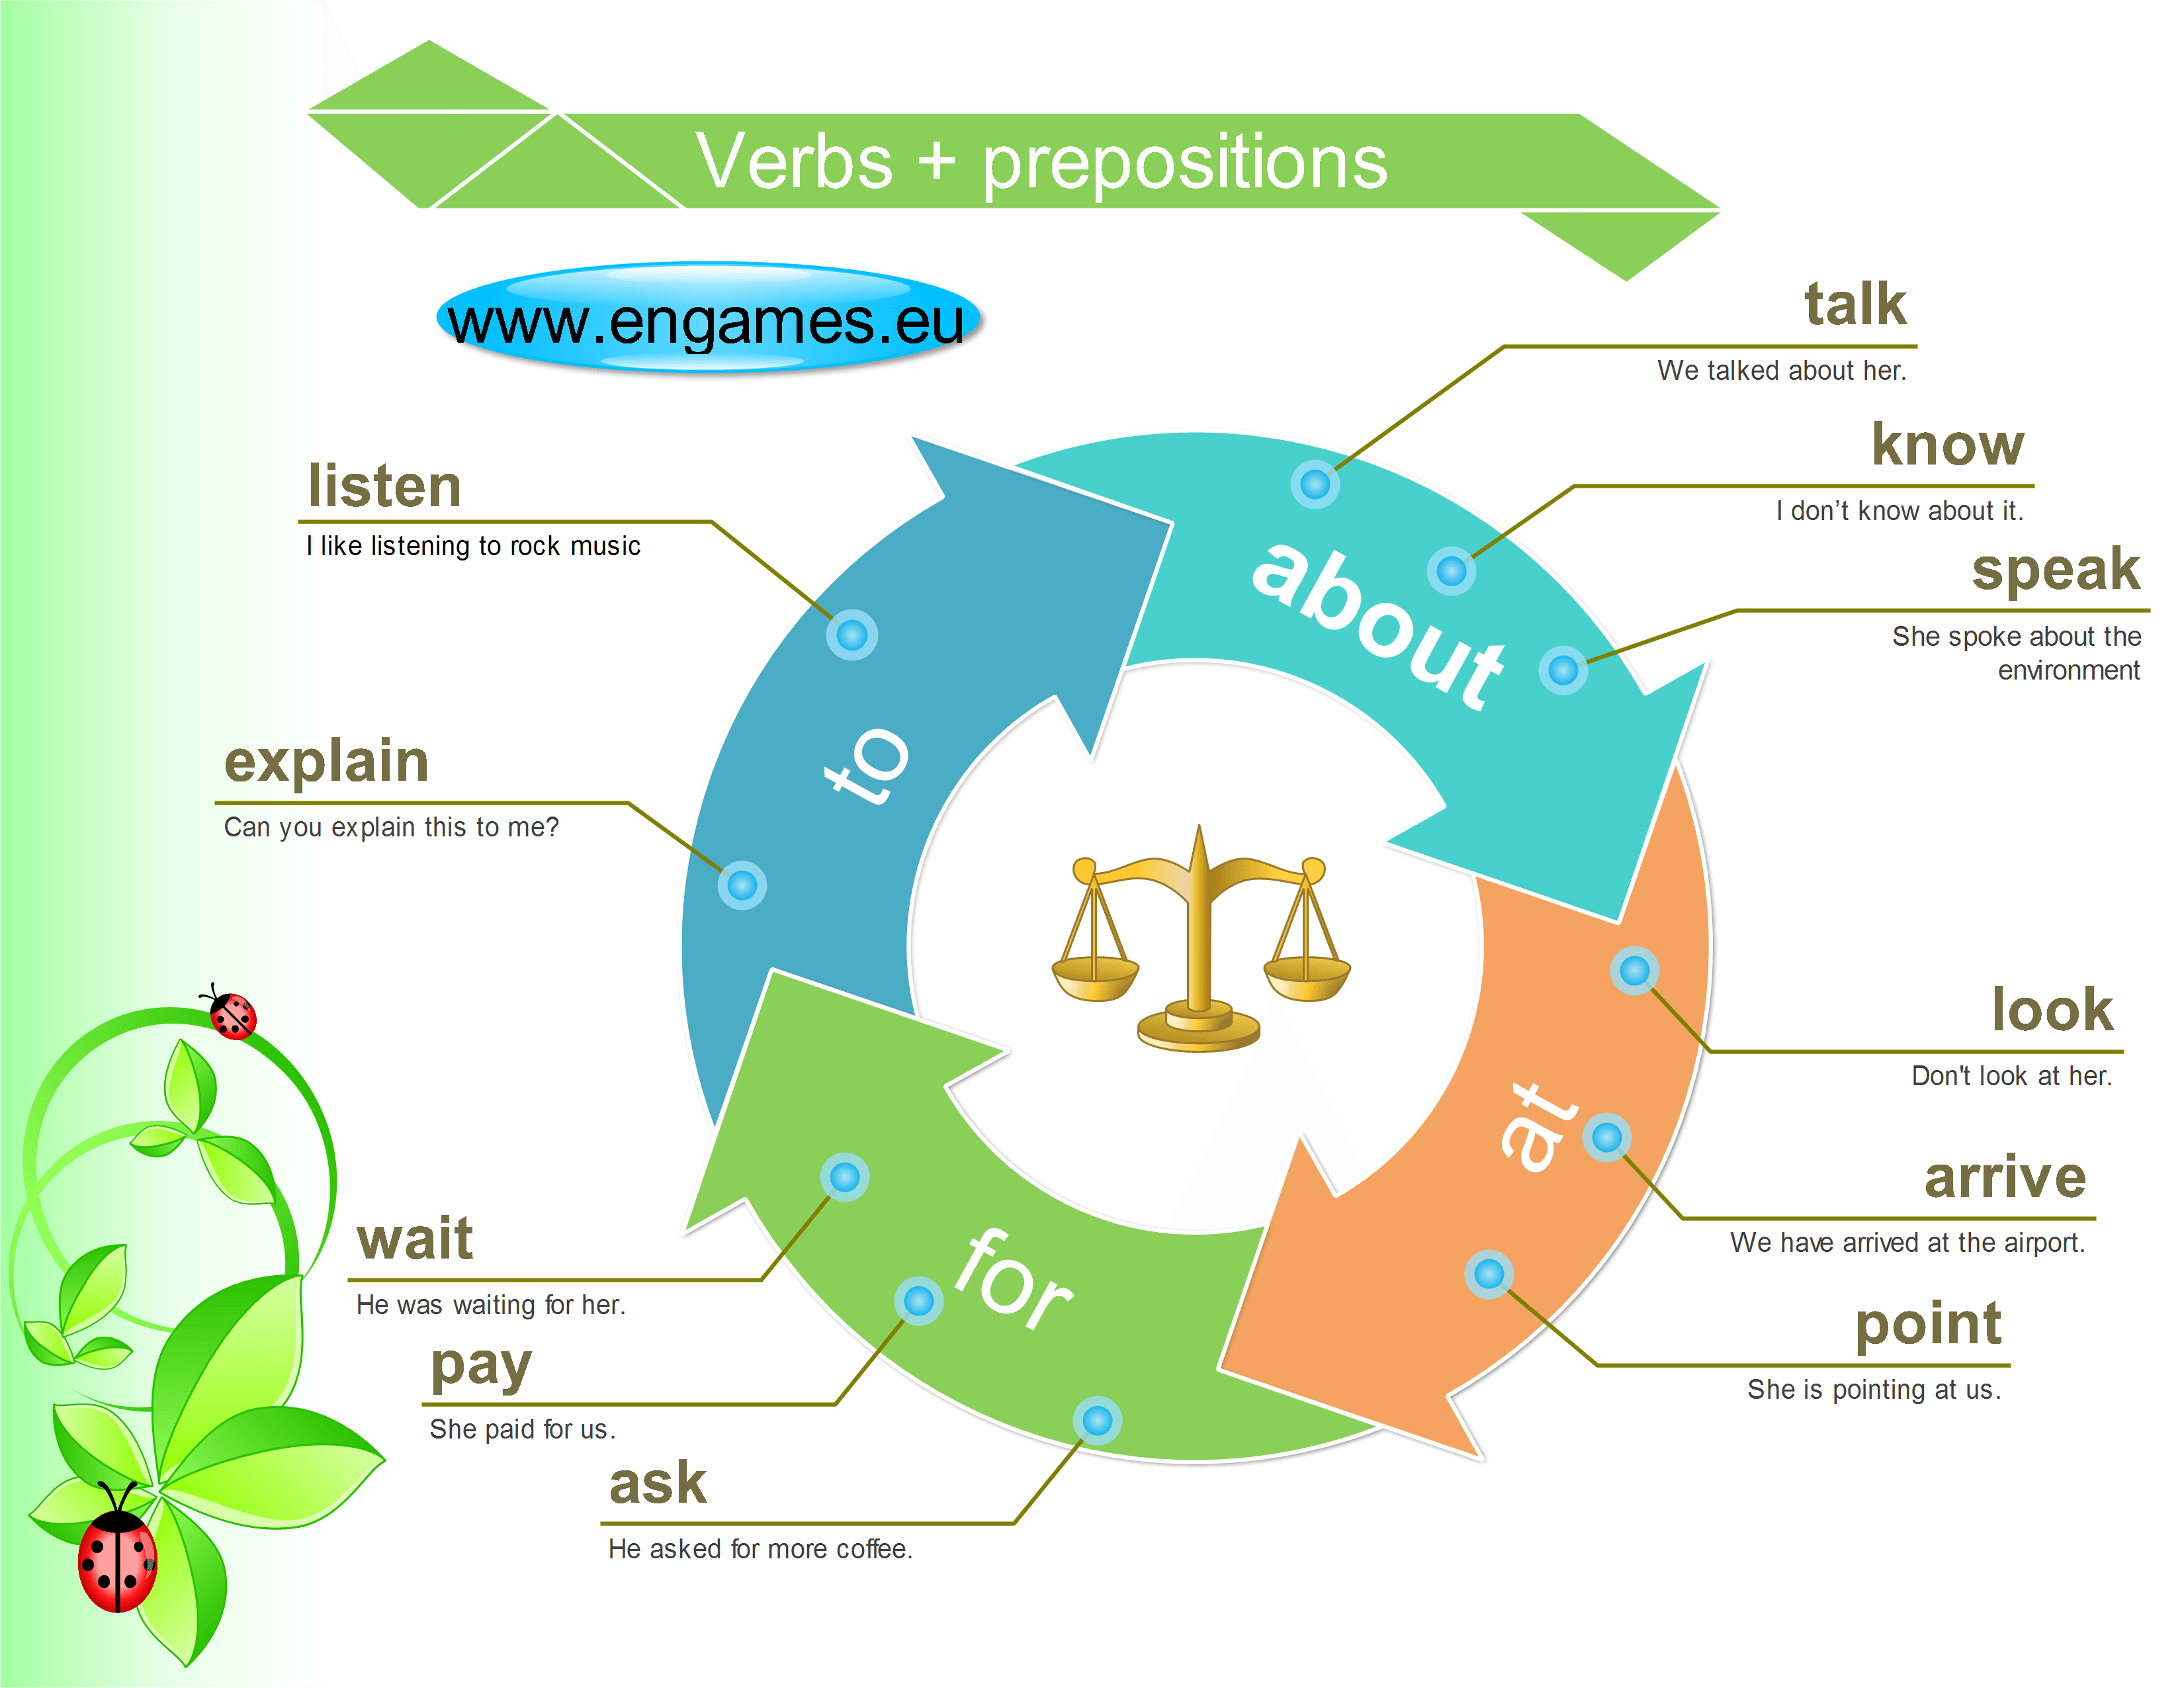 Preposition list. Verb preposition. Verbs with prepositions. Verbs with prepositions в английском языке. Phrasal verbs with prepositions.